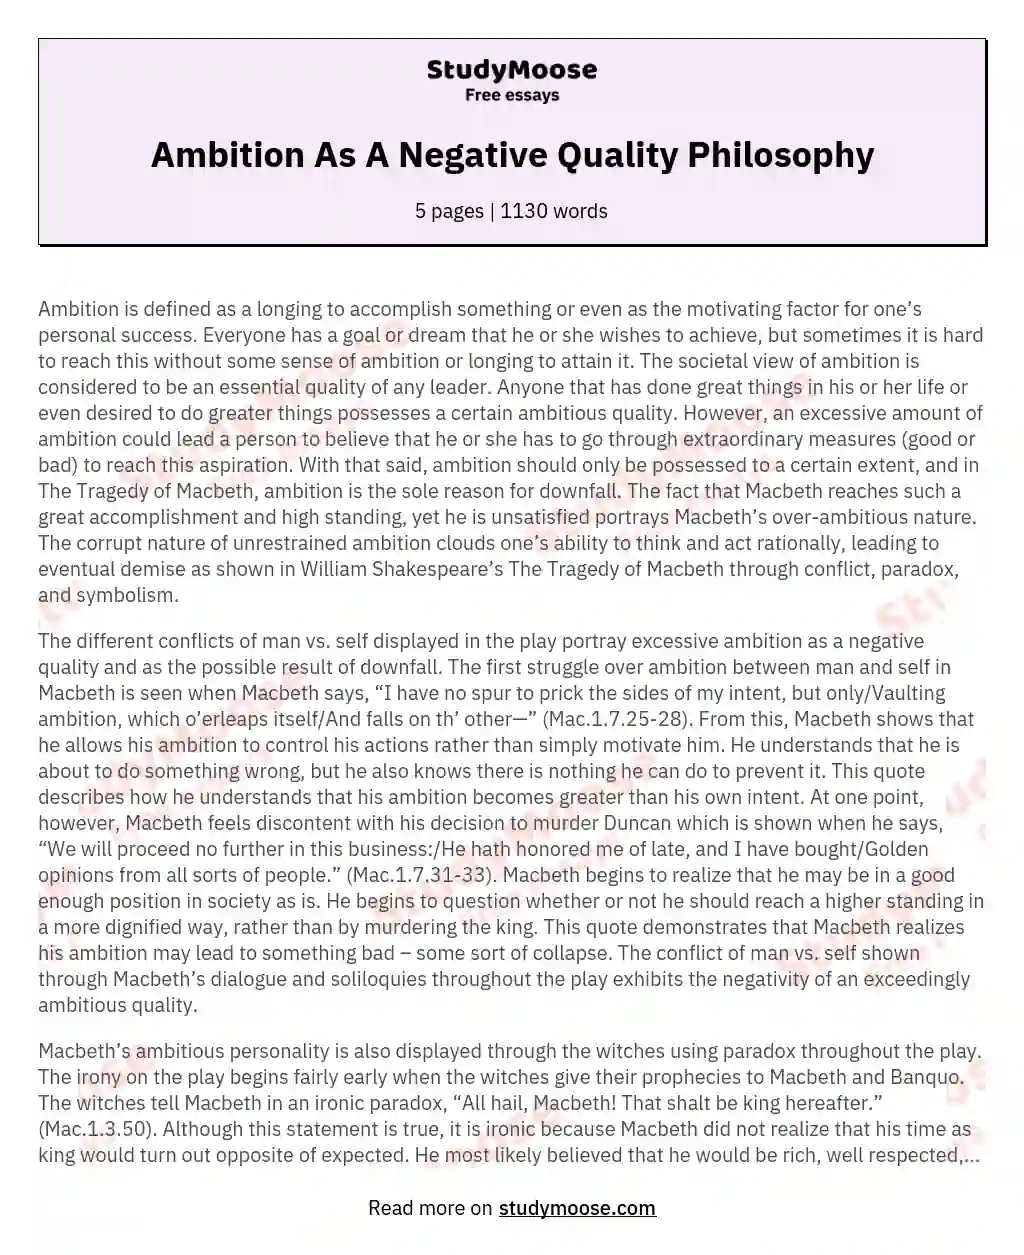 Ambition As A Negative Quality Philosophy essay